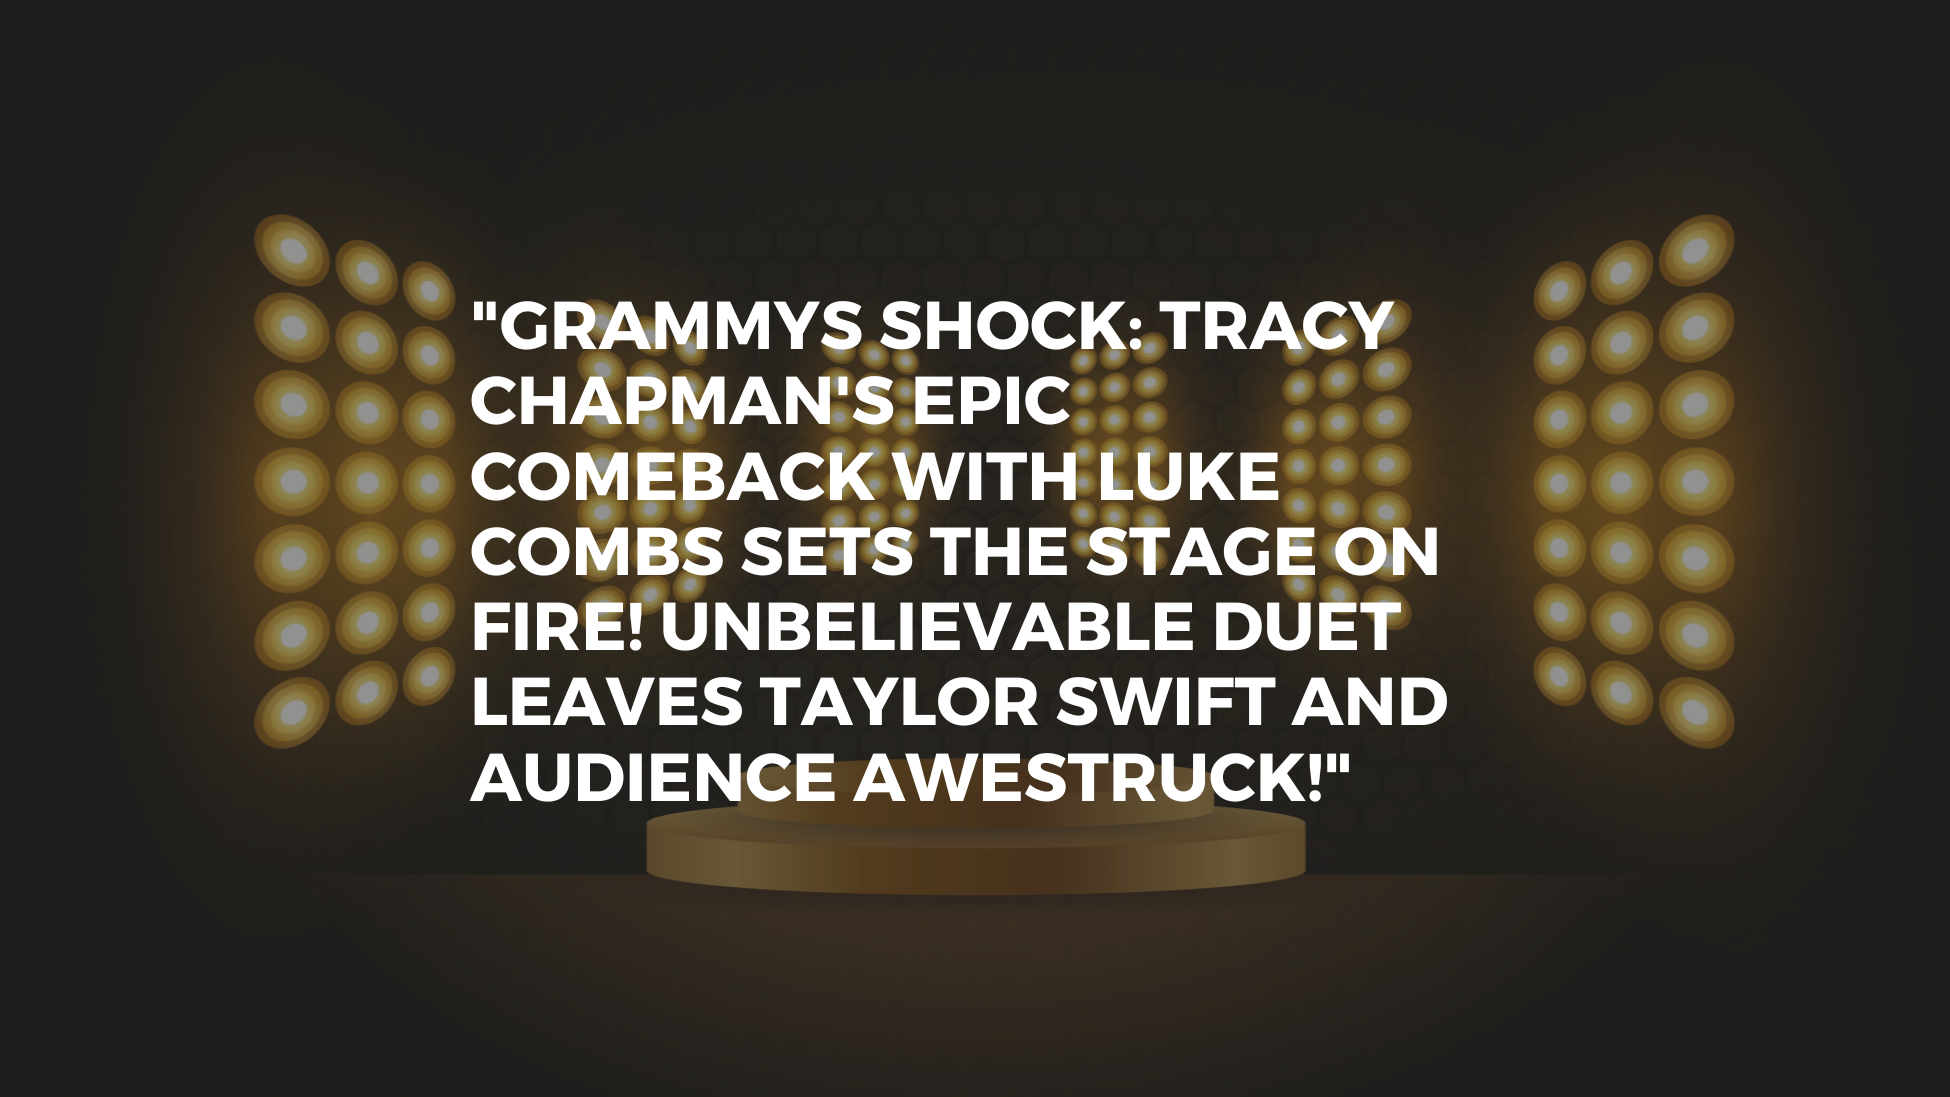 "Grammys Shock: Tracy Chapman's Epic Comeback with Luke Combs Sets the Stage on Fire! Unbelievable Duet Leaves Taylor Swift and Audience Awestruck!"